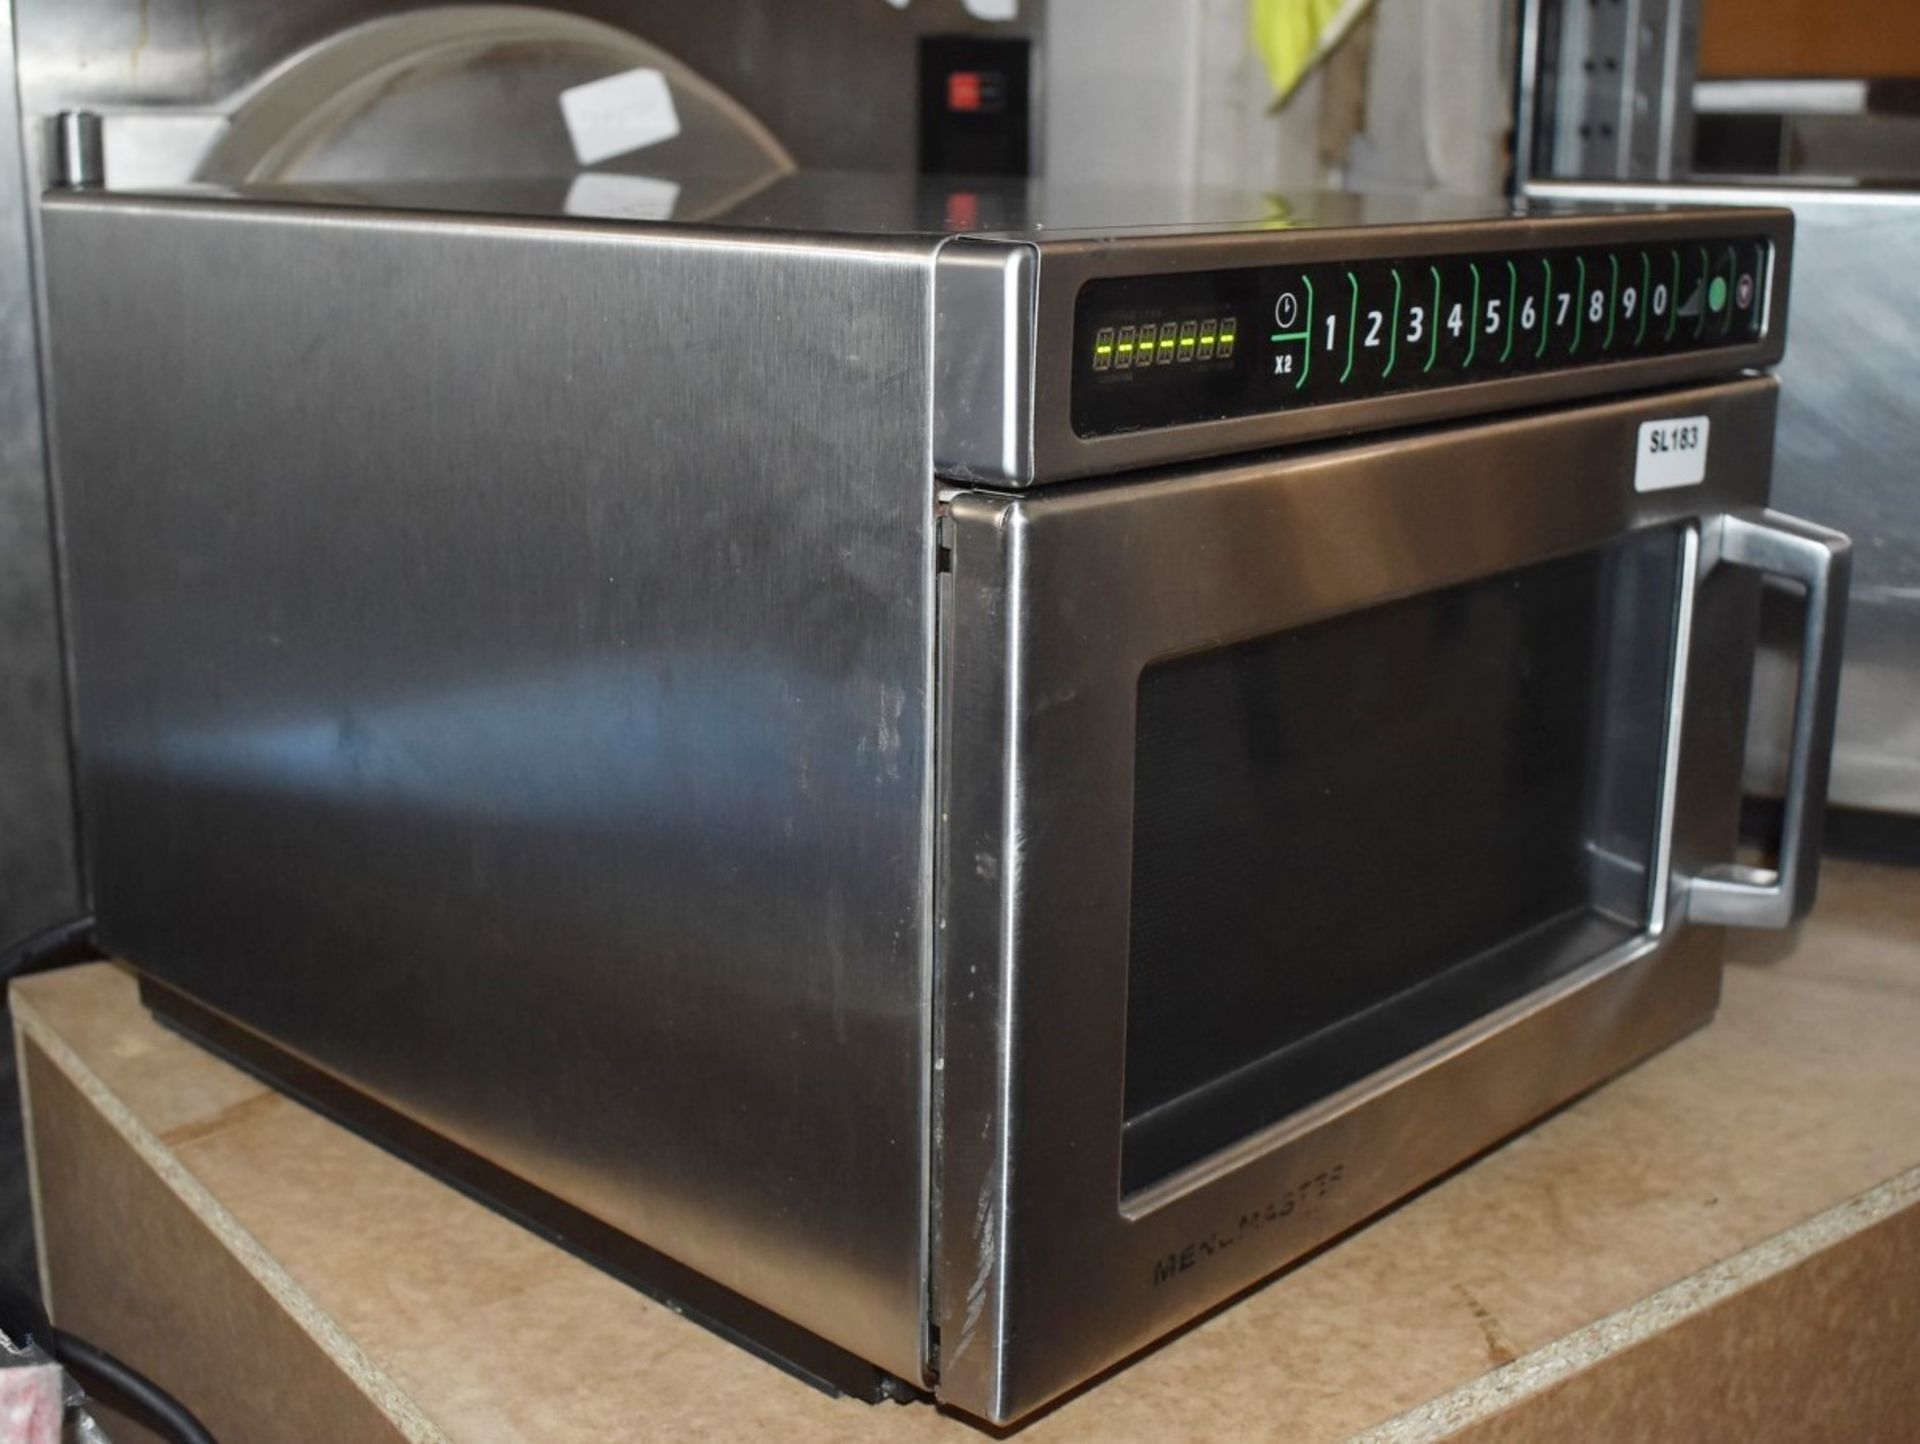 1 x Menumaster Commercial Microwave Oven - Model DEC14E2U - 1.4kW, 13A, 17Ltr - Recently Removed - Image 9 of 14